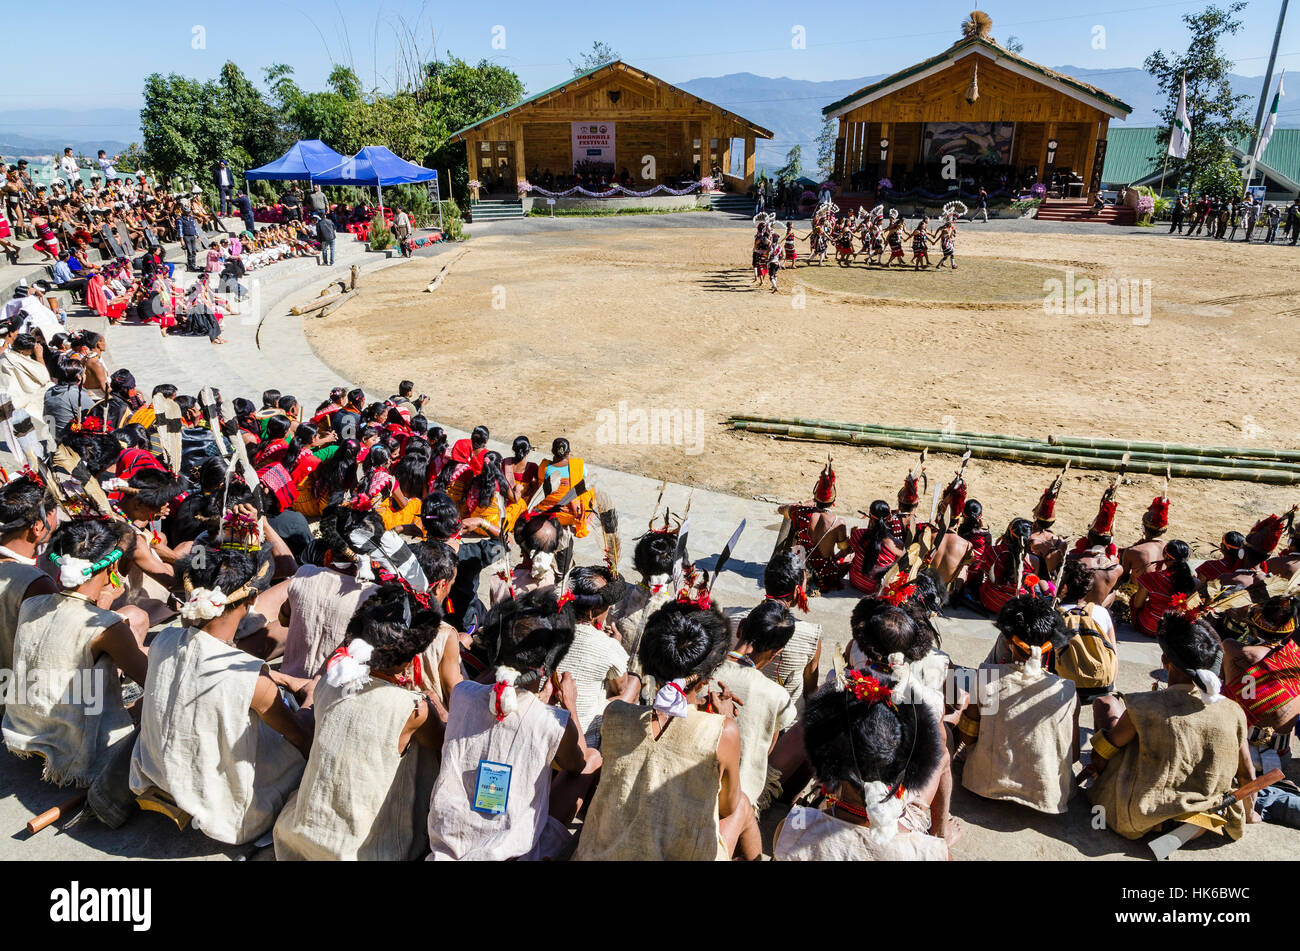 The Tribes of Nagaland are displaying their customs and dances at the big showground of the Hornbill-Festival Stock Photo